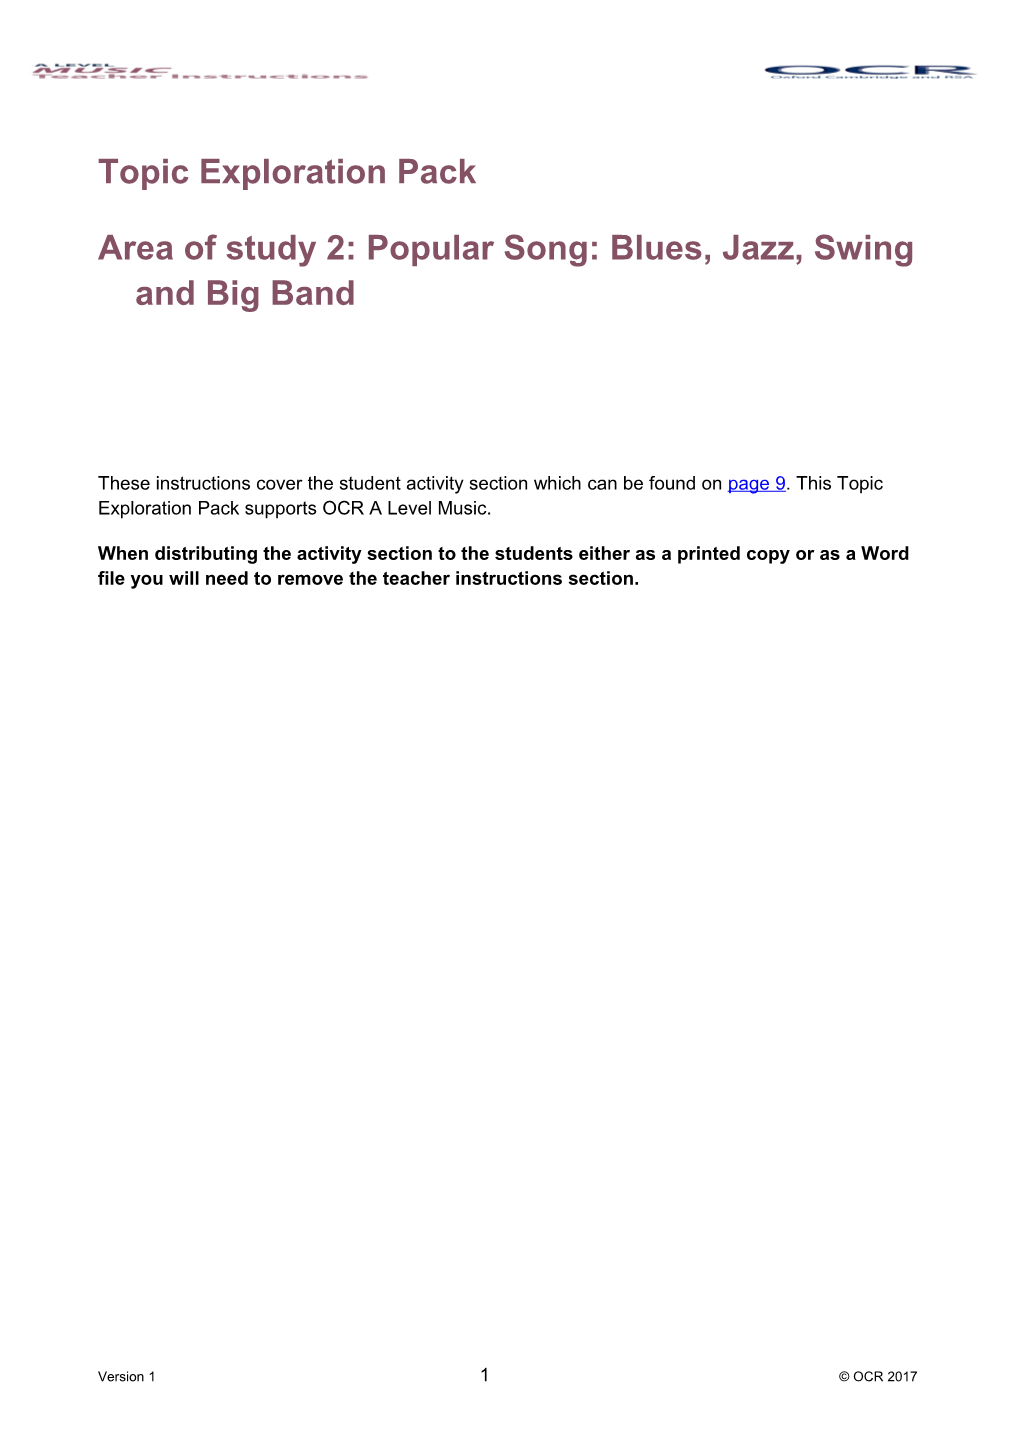 OCR a Level Music TEP - Popular Song: Blues, Jazz, Swing and Big Band